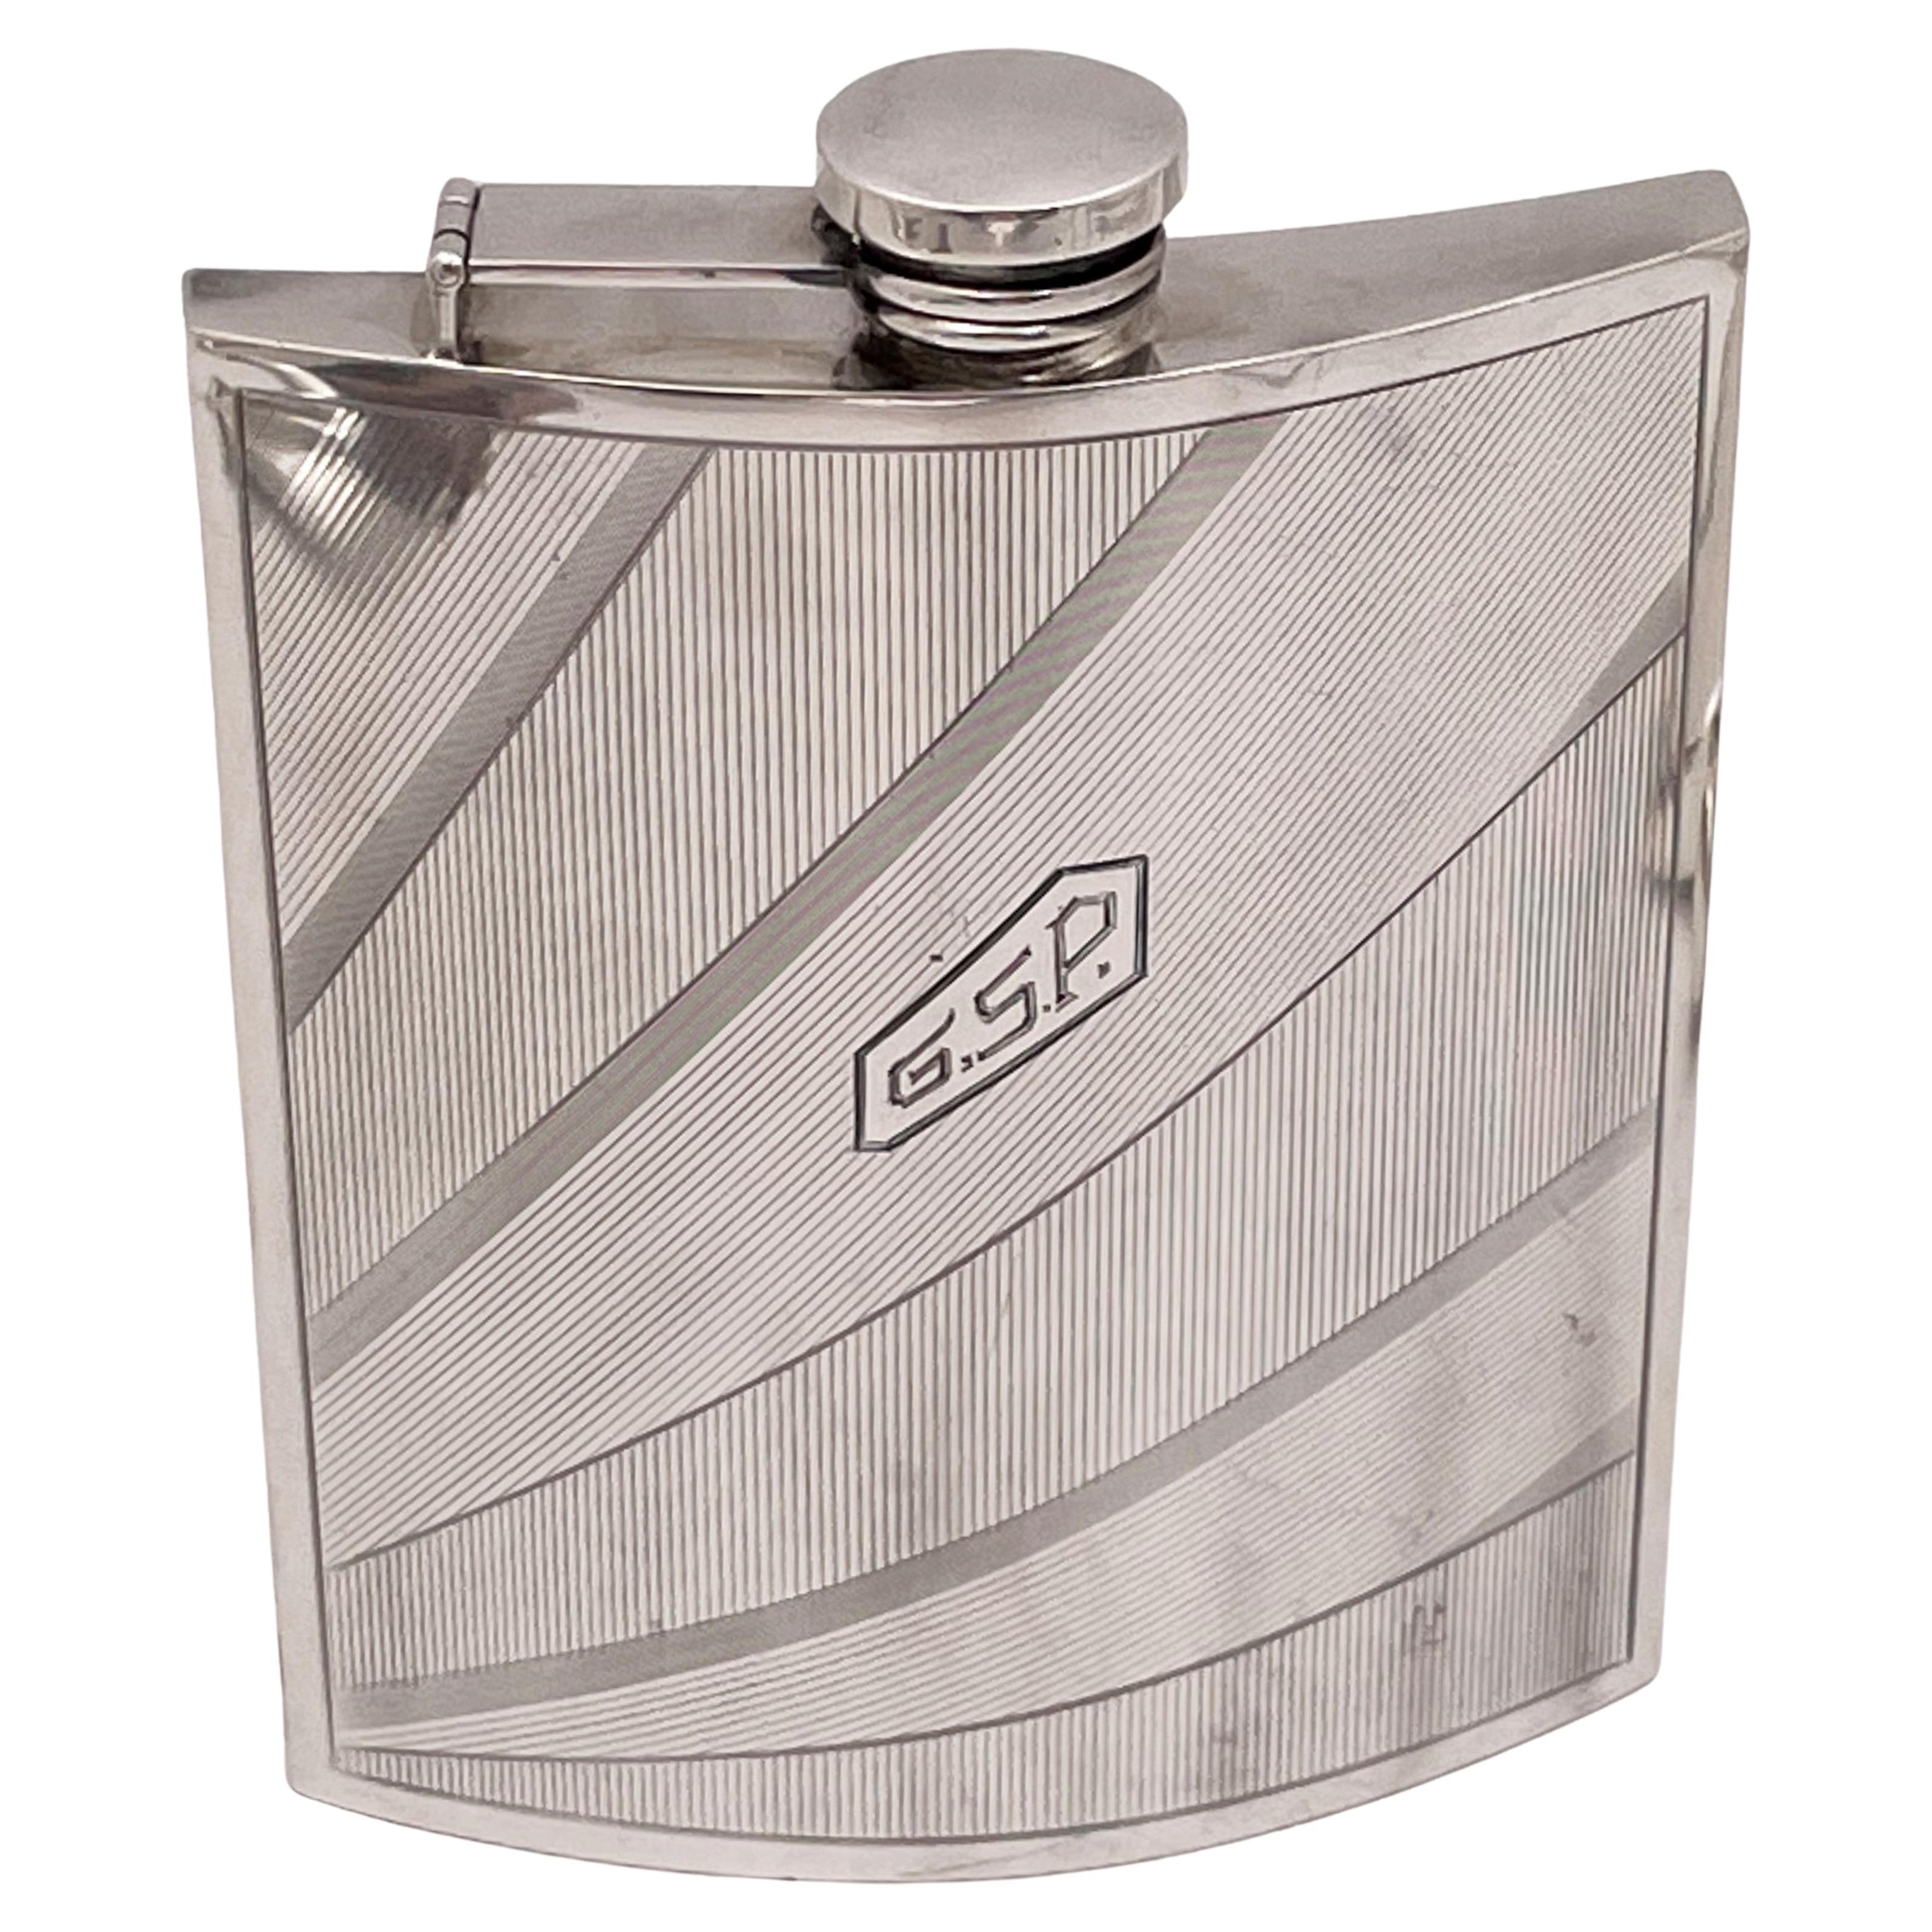 Watrous pour International Sterling Silver Early 20th Century Art Deco Flask